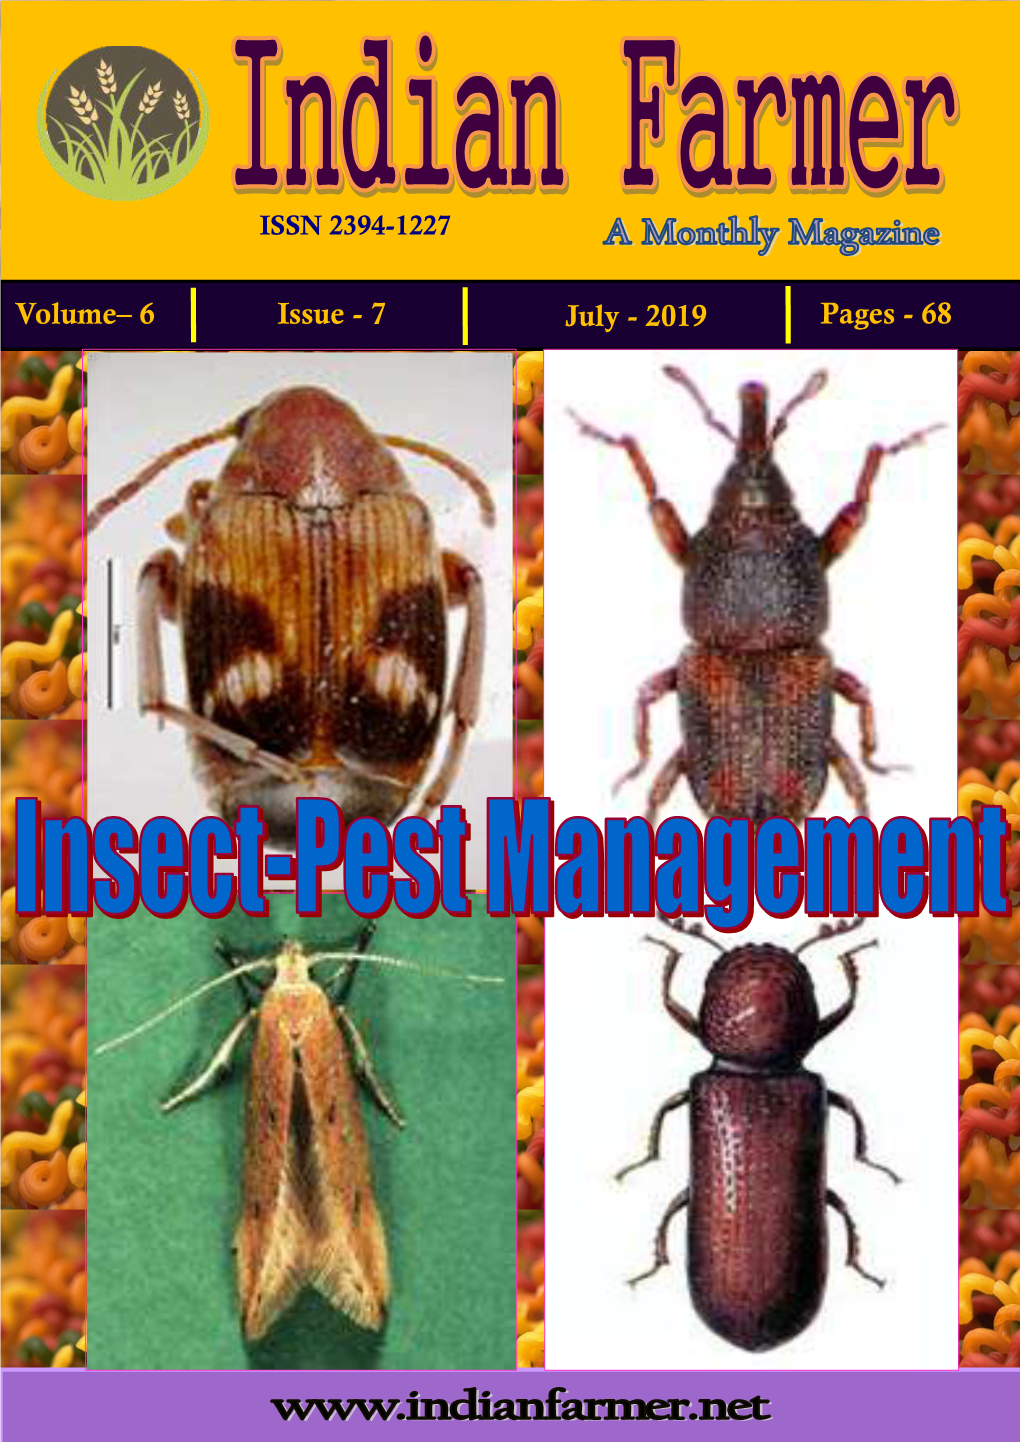 7 July - 2019 Pages - 68 Indian Farmer a Monthly Magazine